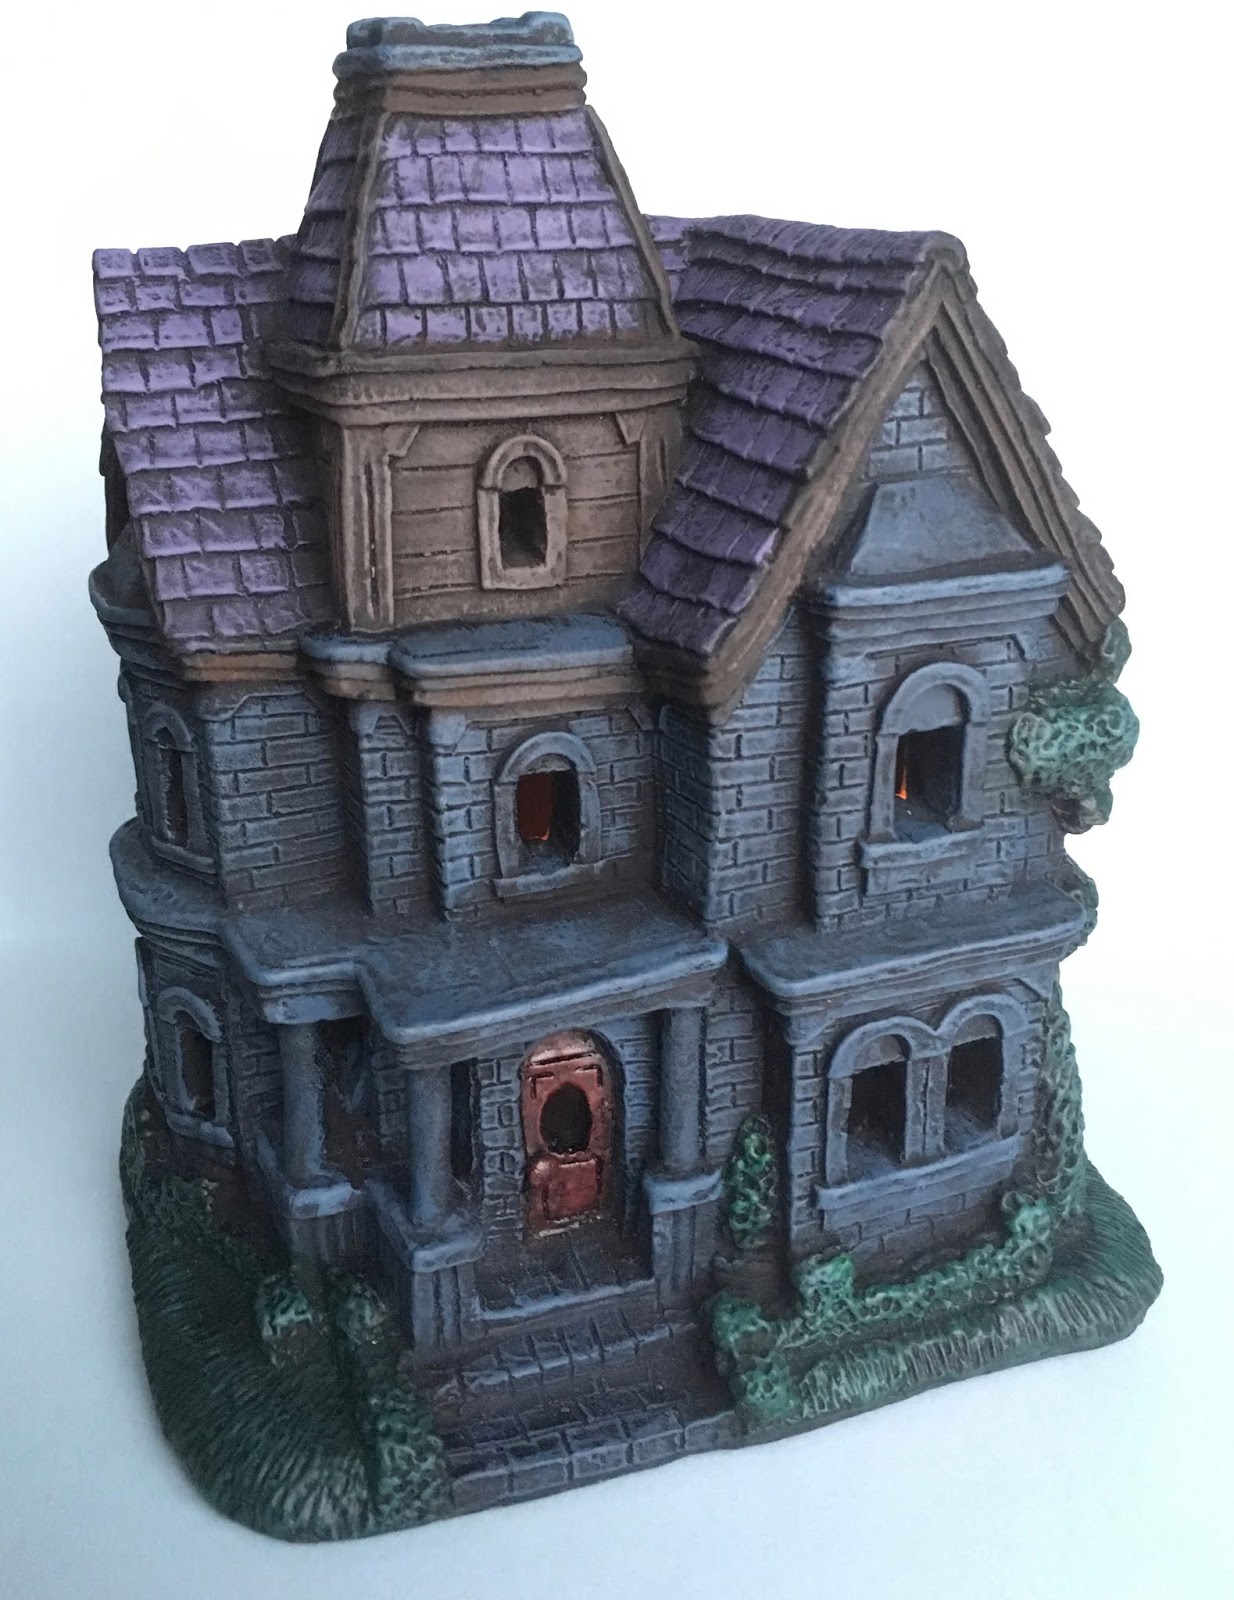 Bleaseworld: Haunted House!